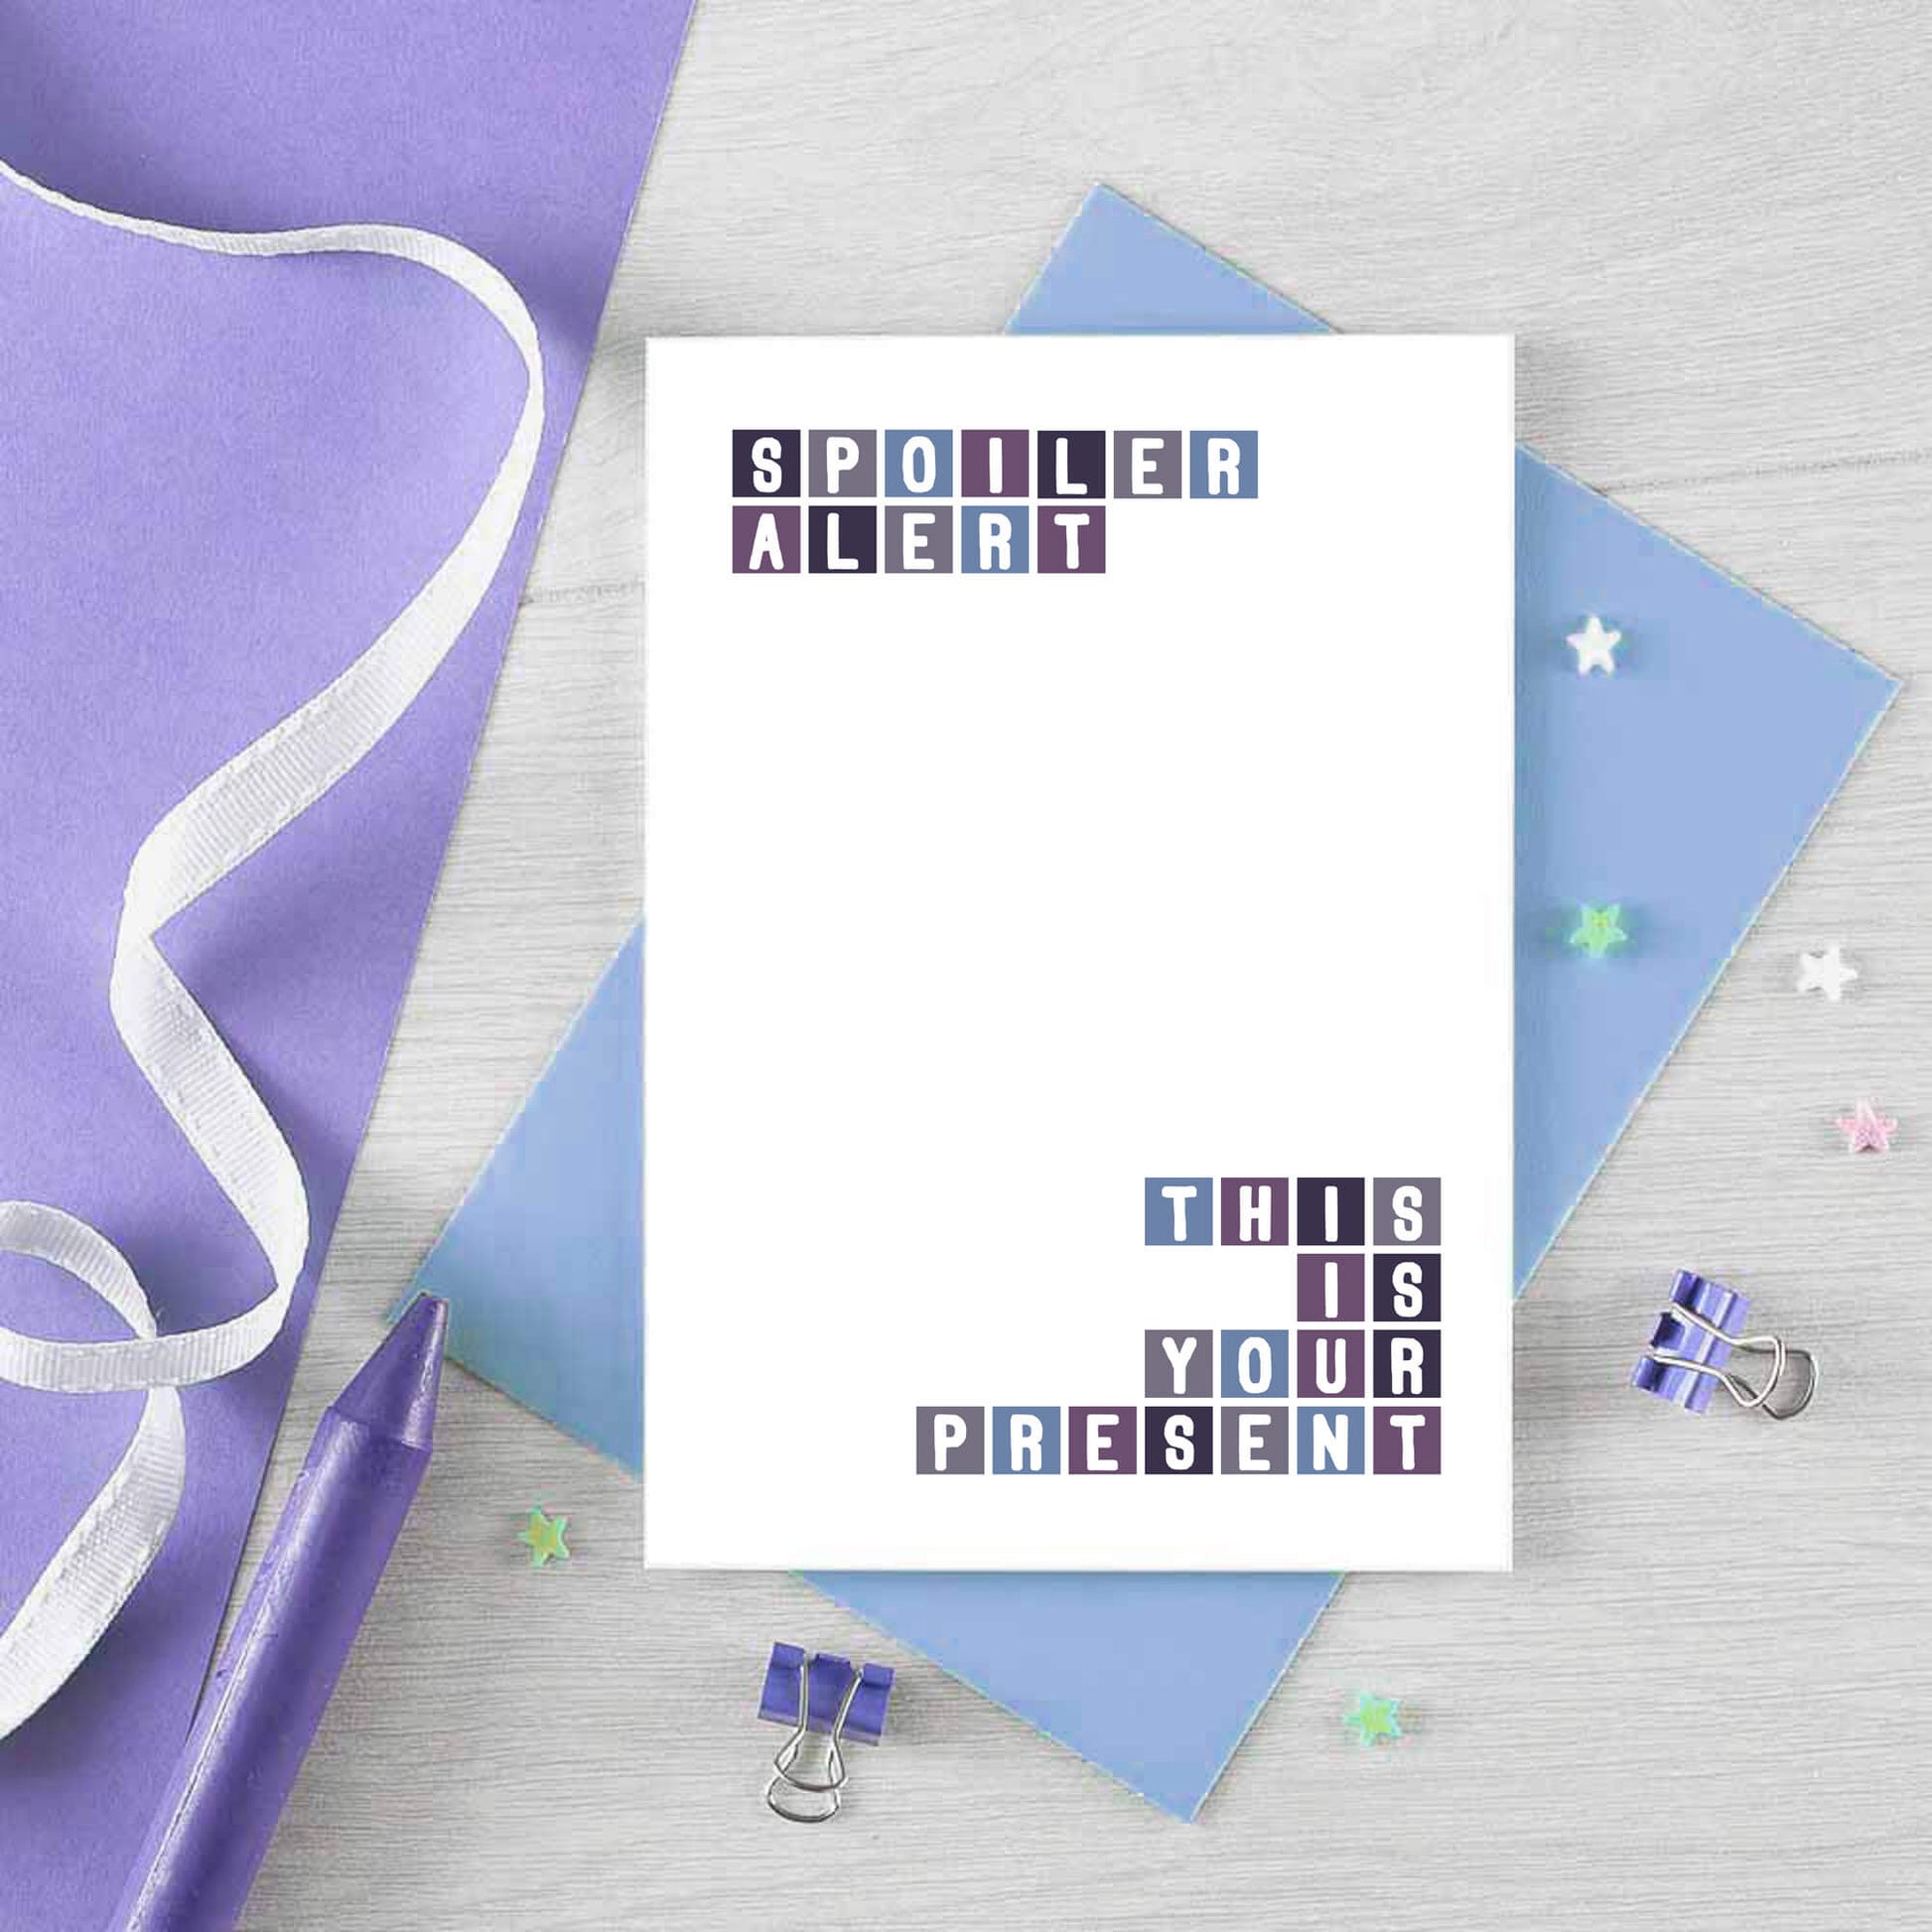 Funny Card by SixElevenCreations. Reads Spoiler alert This is your present. Product Code SE0289A6